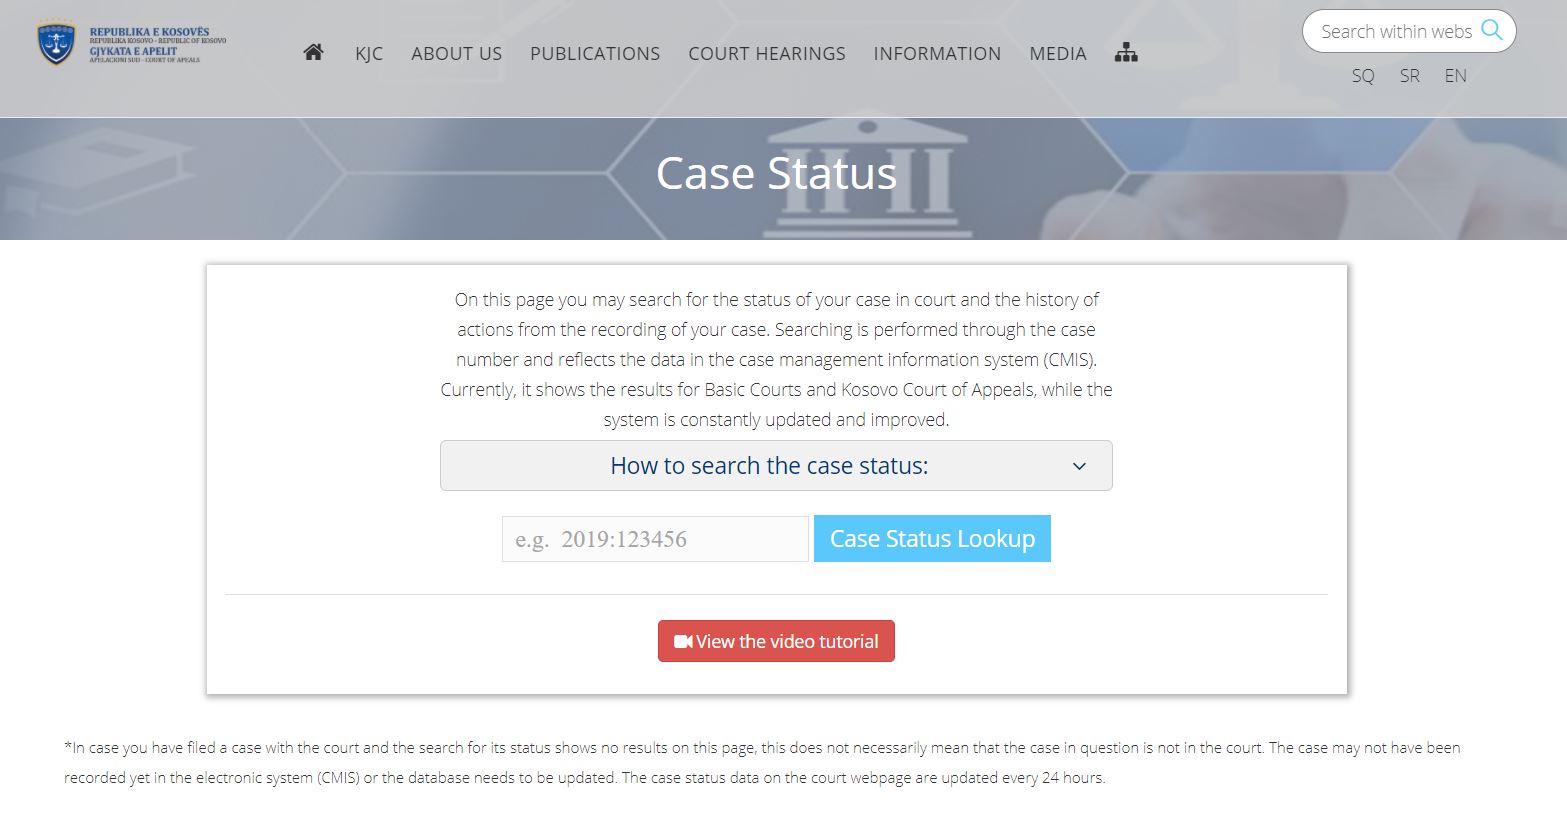 USAID’s JSSP in Kosovo Helps with Online Access to Court Case Status